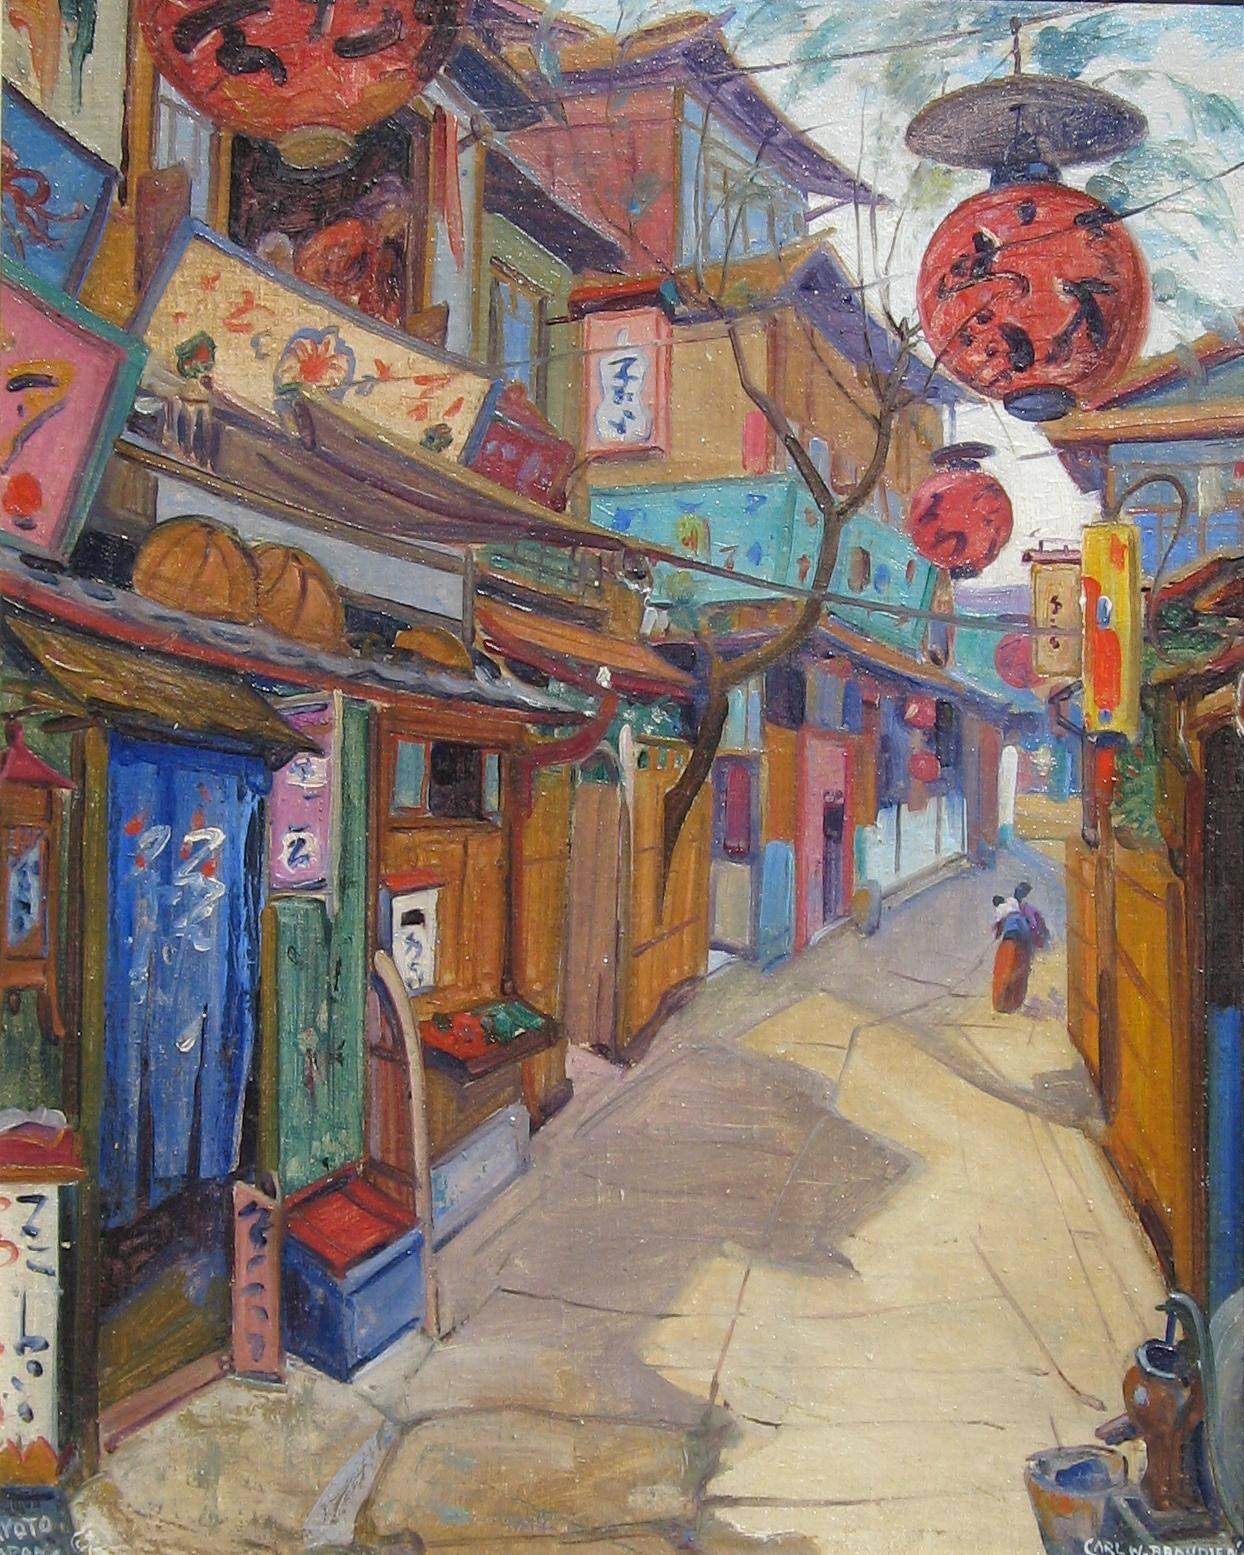 Oil on board by Carl Brandien (1886-1965) - Street in Kyoto with red lanterns. 
Titled on the verso: “Street in Old Kyoto, Japan”
Signed lower right and titled lower left “Kyoto”
Measures: 20